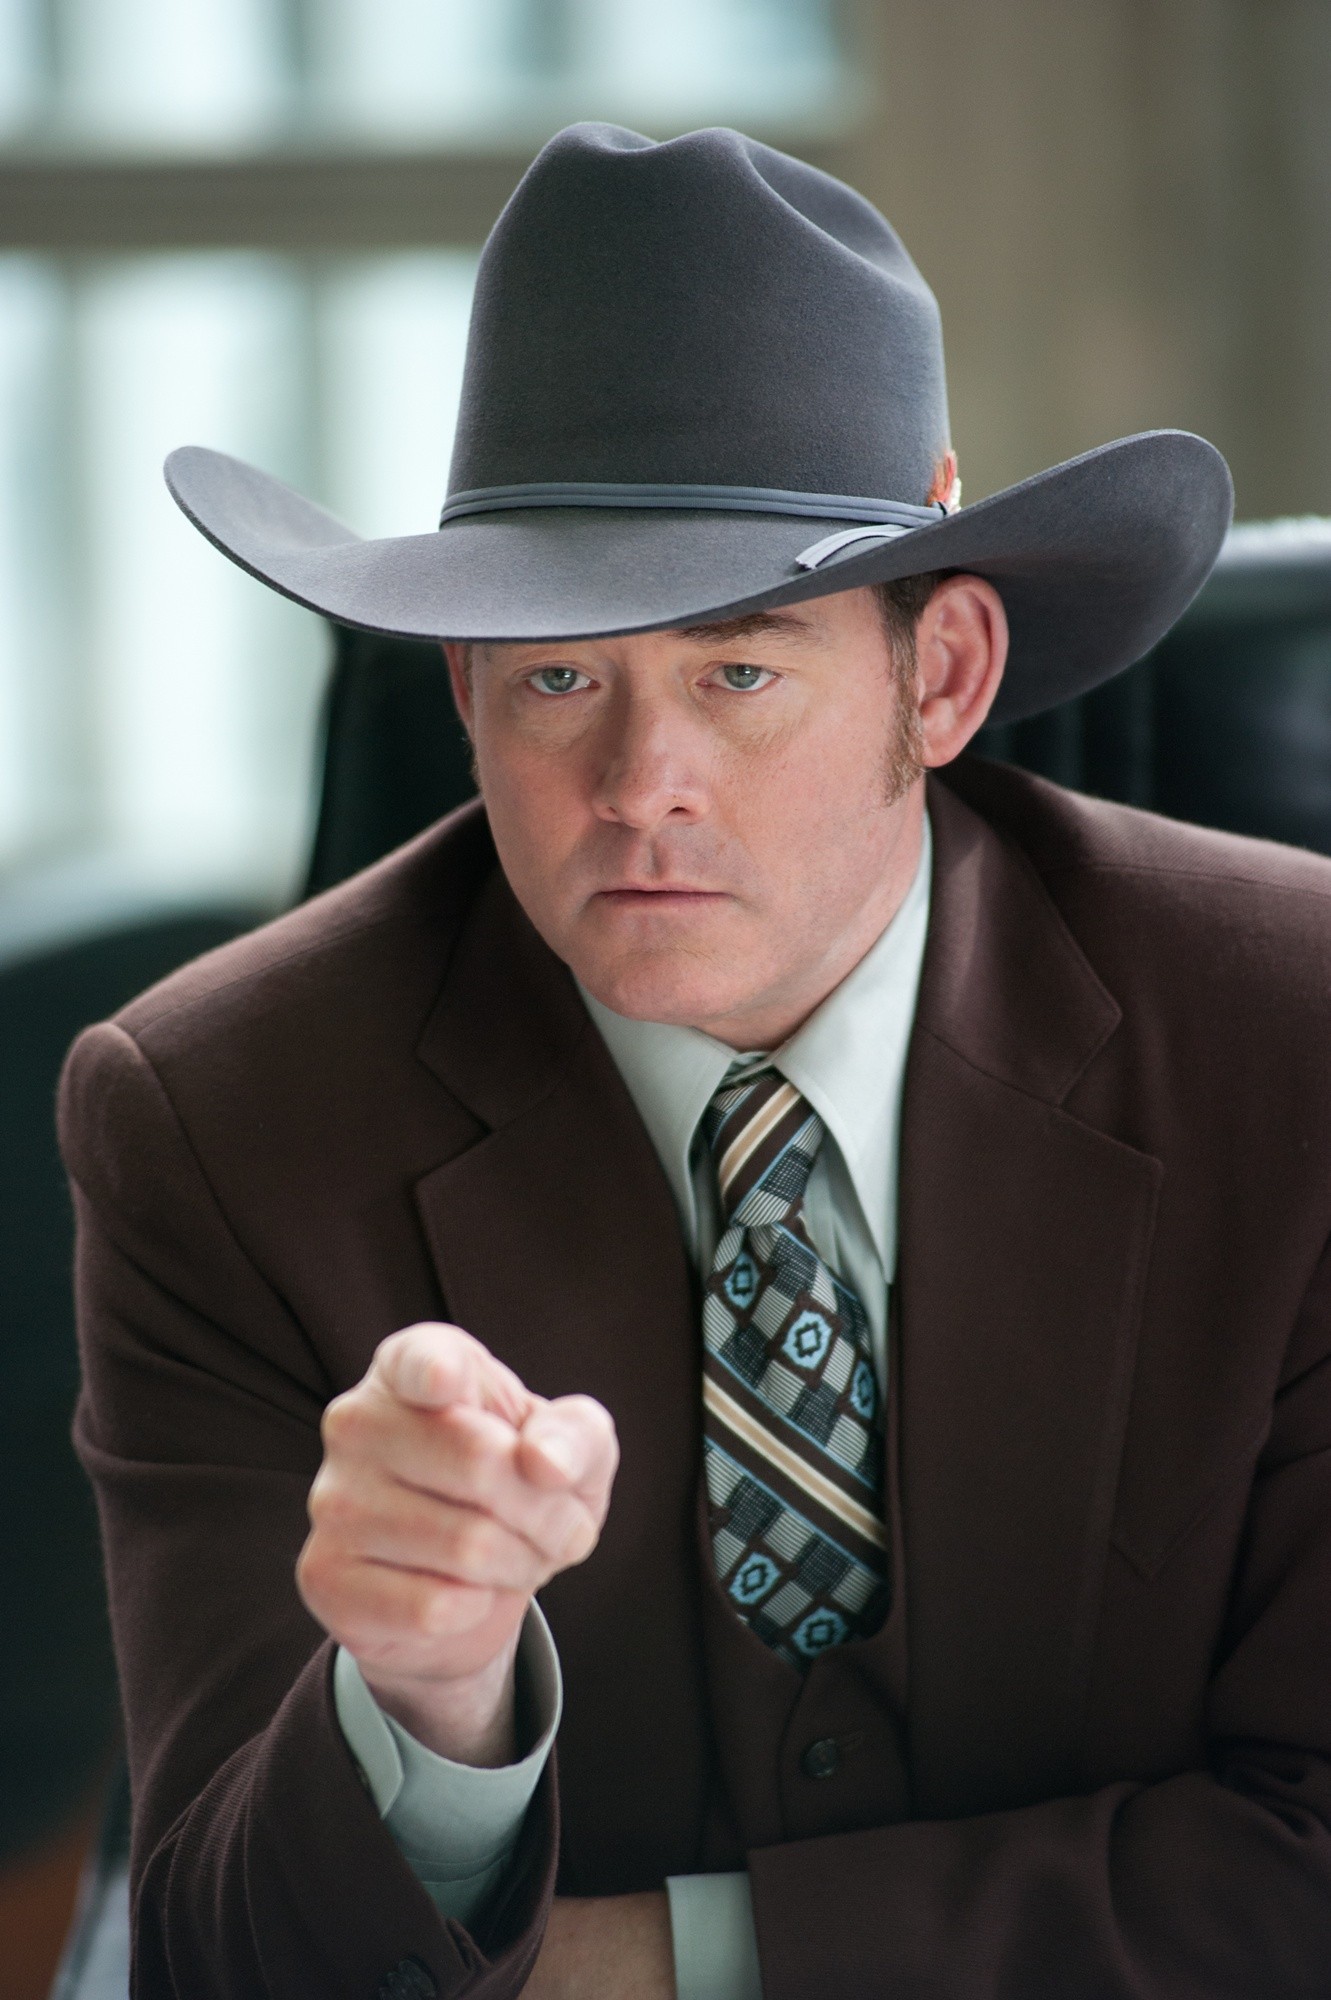 David Koechner stars as Champ Kind in Paramount Pictures' Anchorman: The Legend Continues (2013